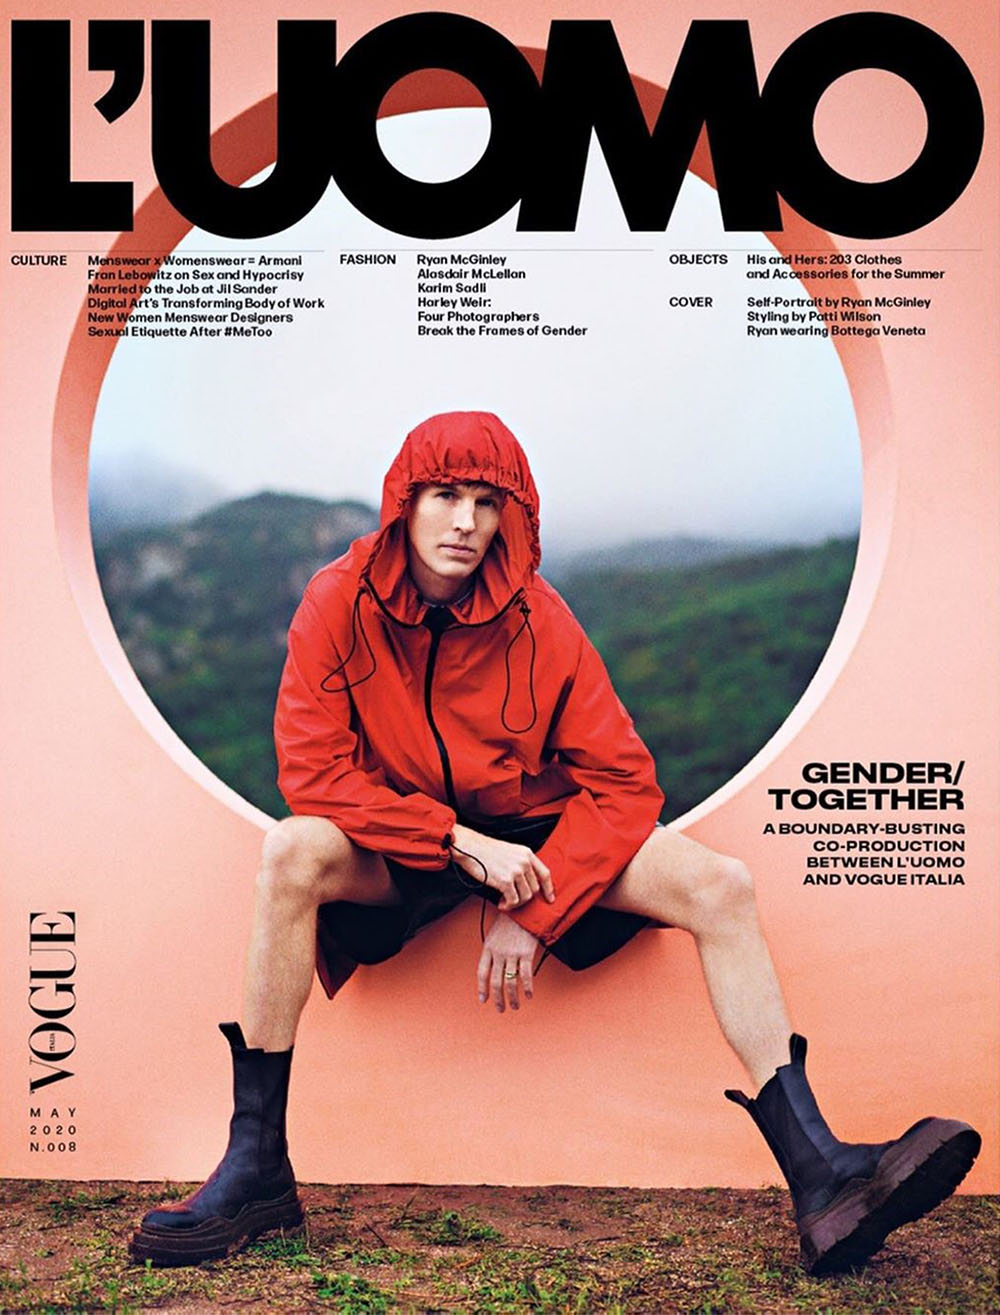 Ryan McGinley covers L’Uomo Vogue May 2020 by Ryan McGinley